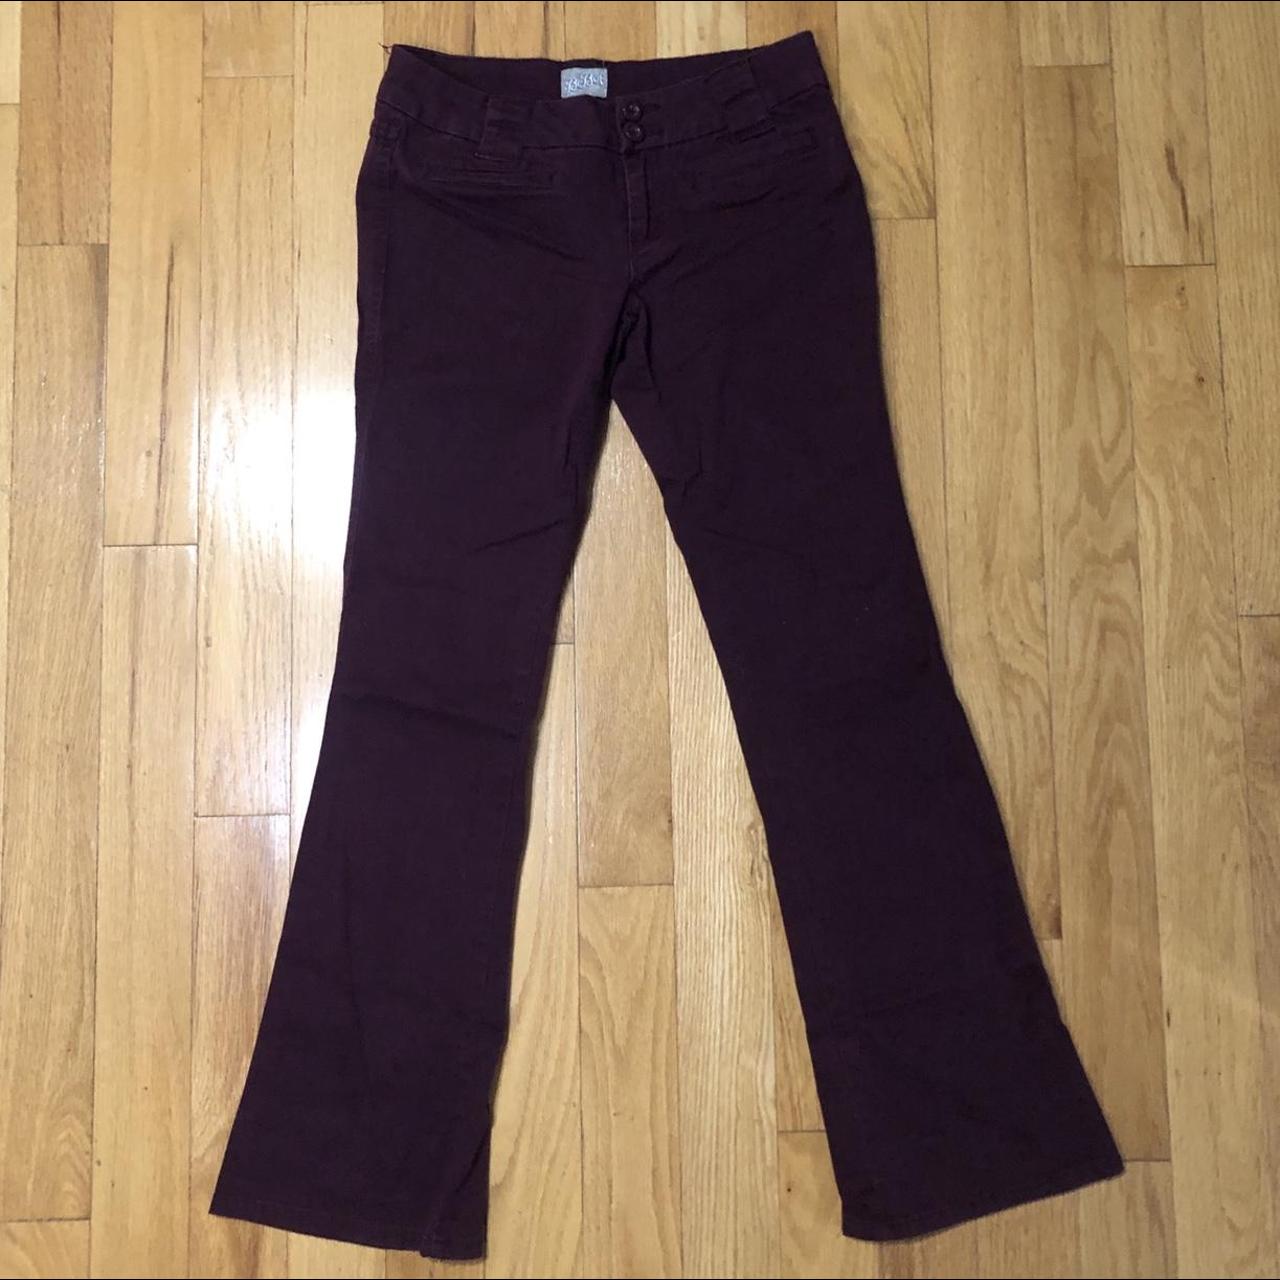 BeBop Women's Red and Burgundy Trousers (3)